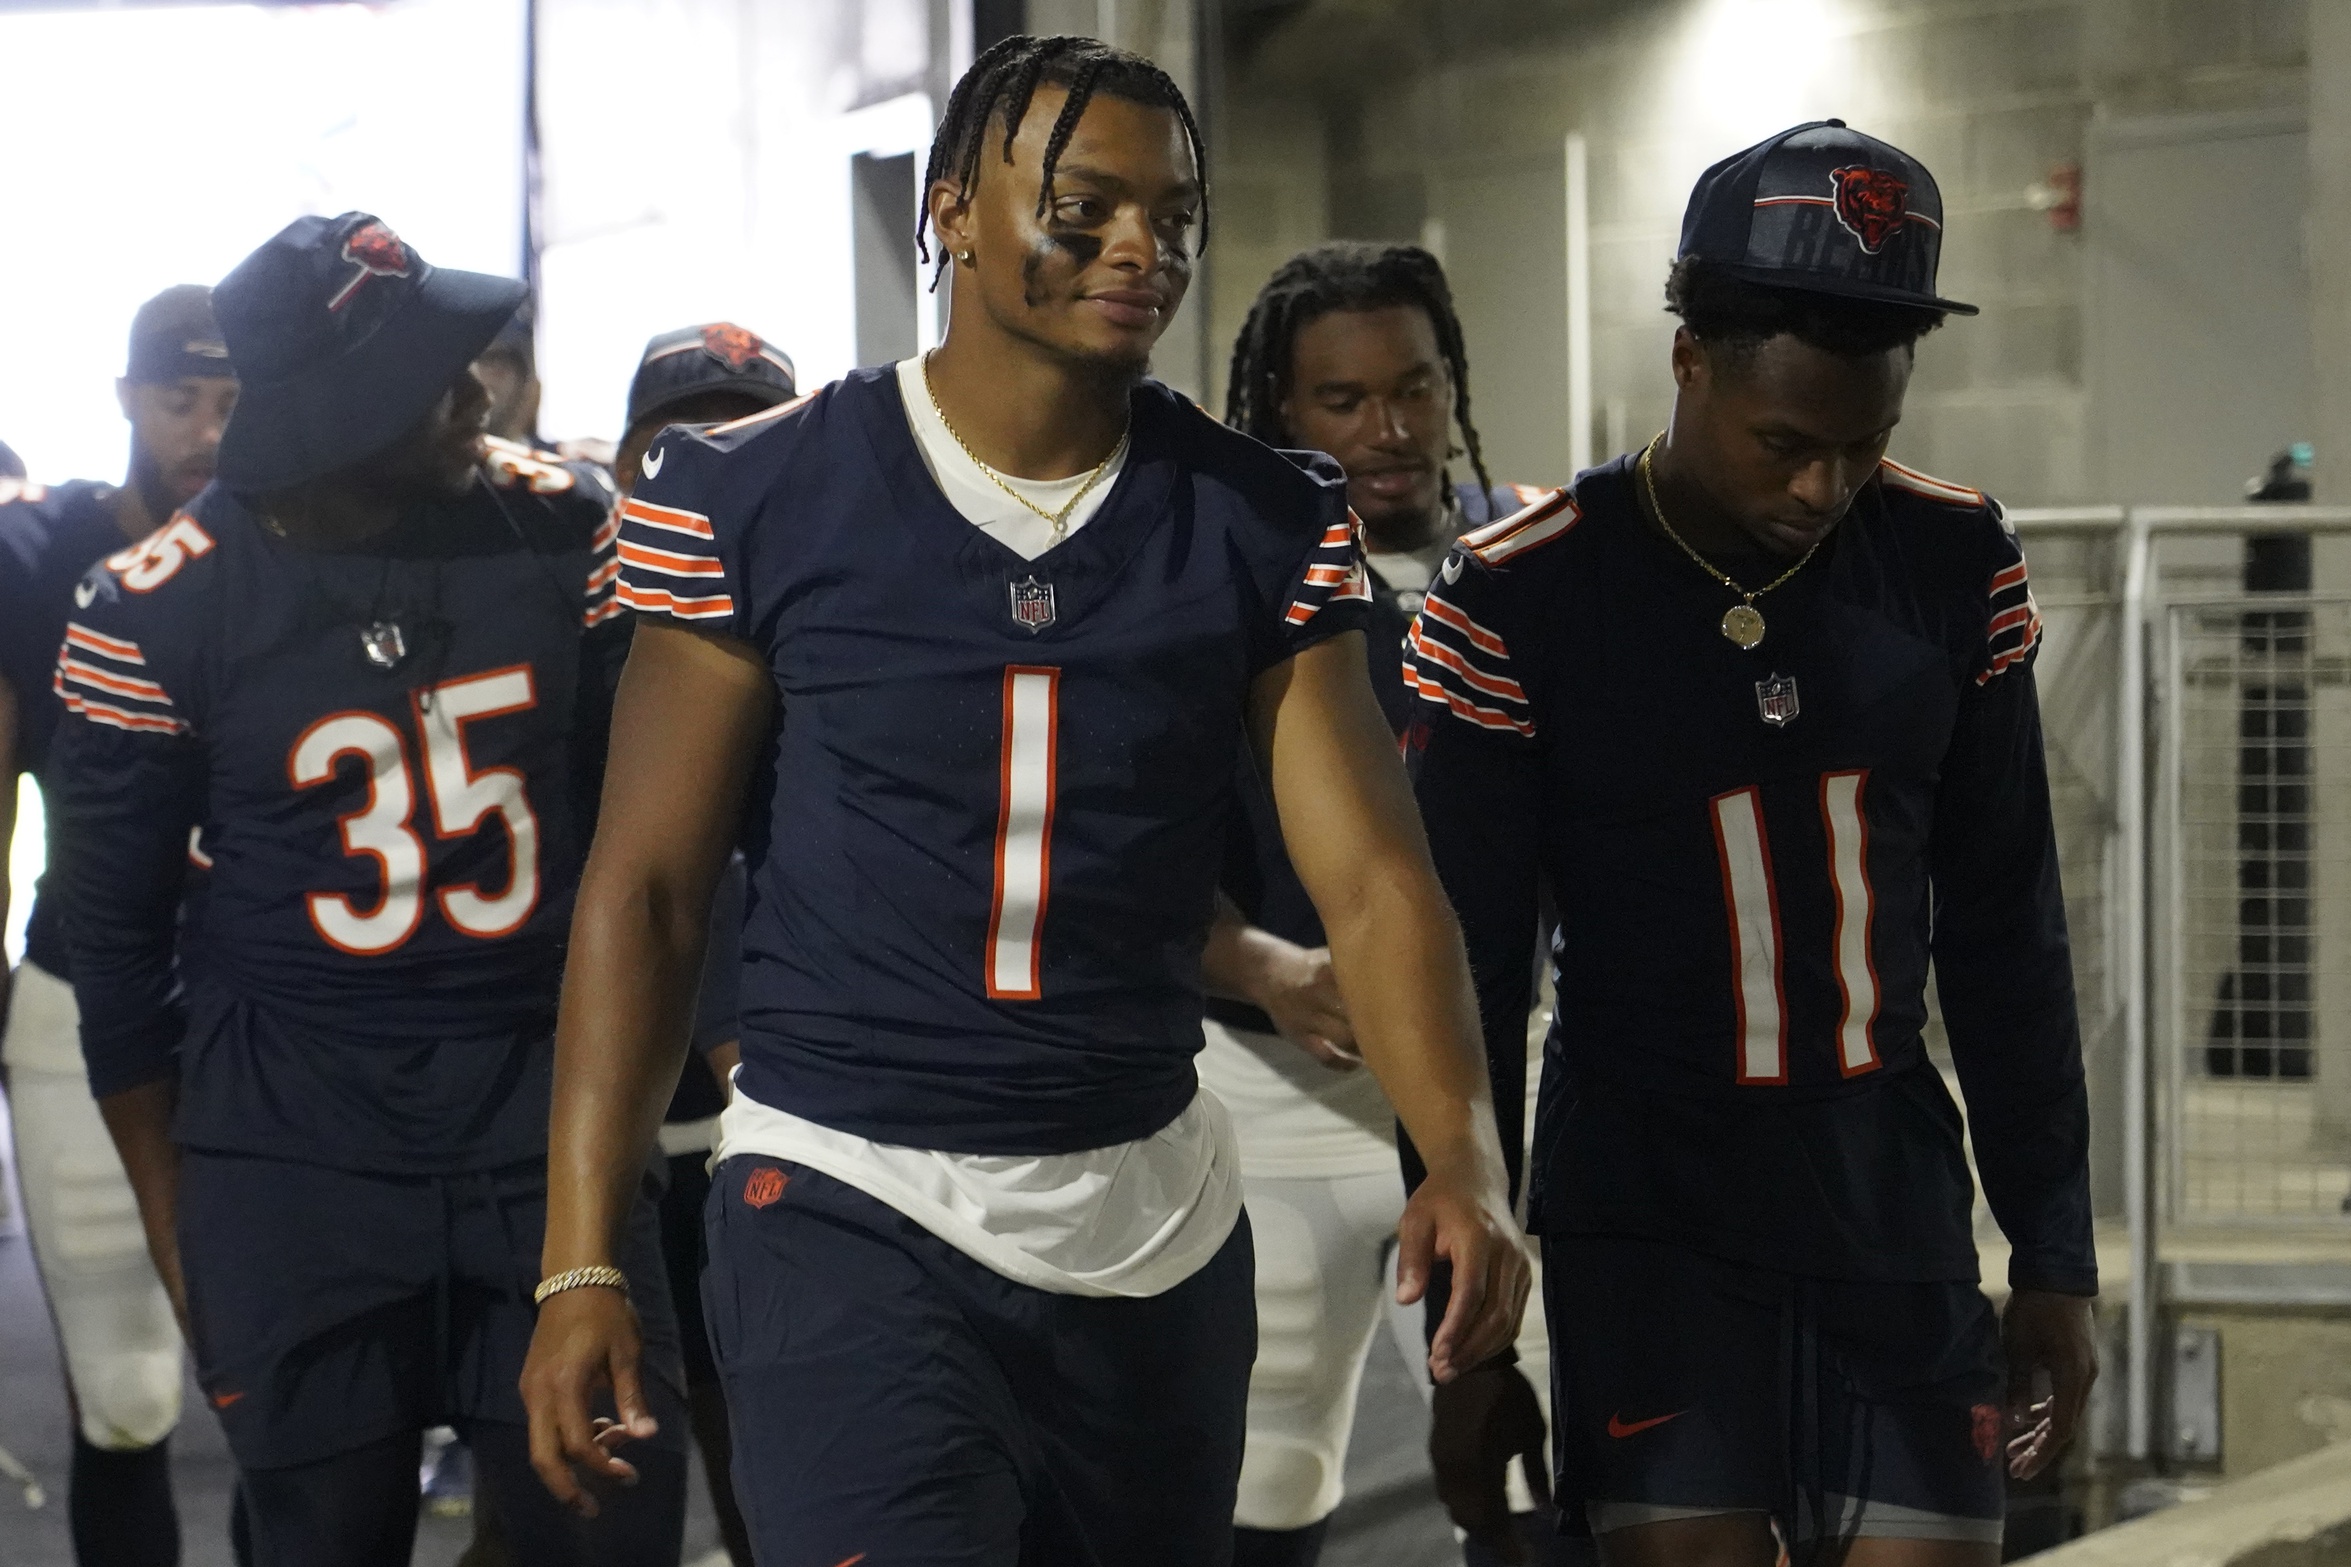 NFL exact division finish position odds and predictions Justin Fields Chicago Bears